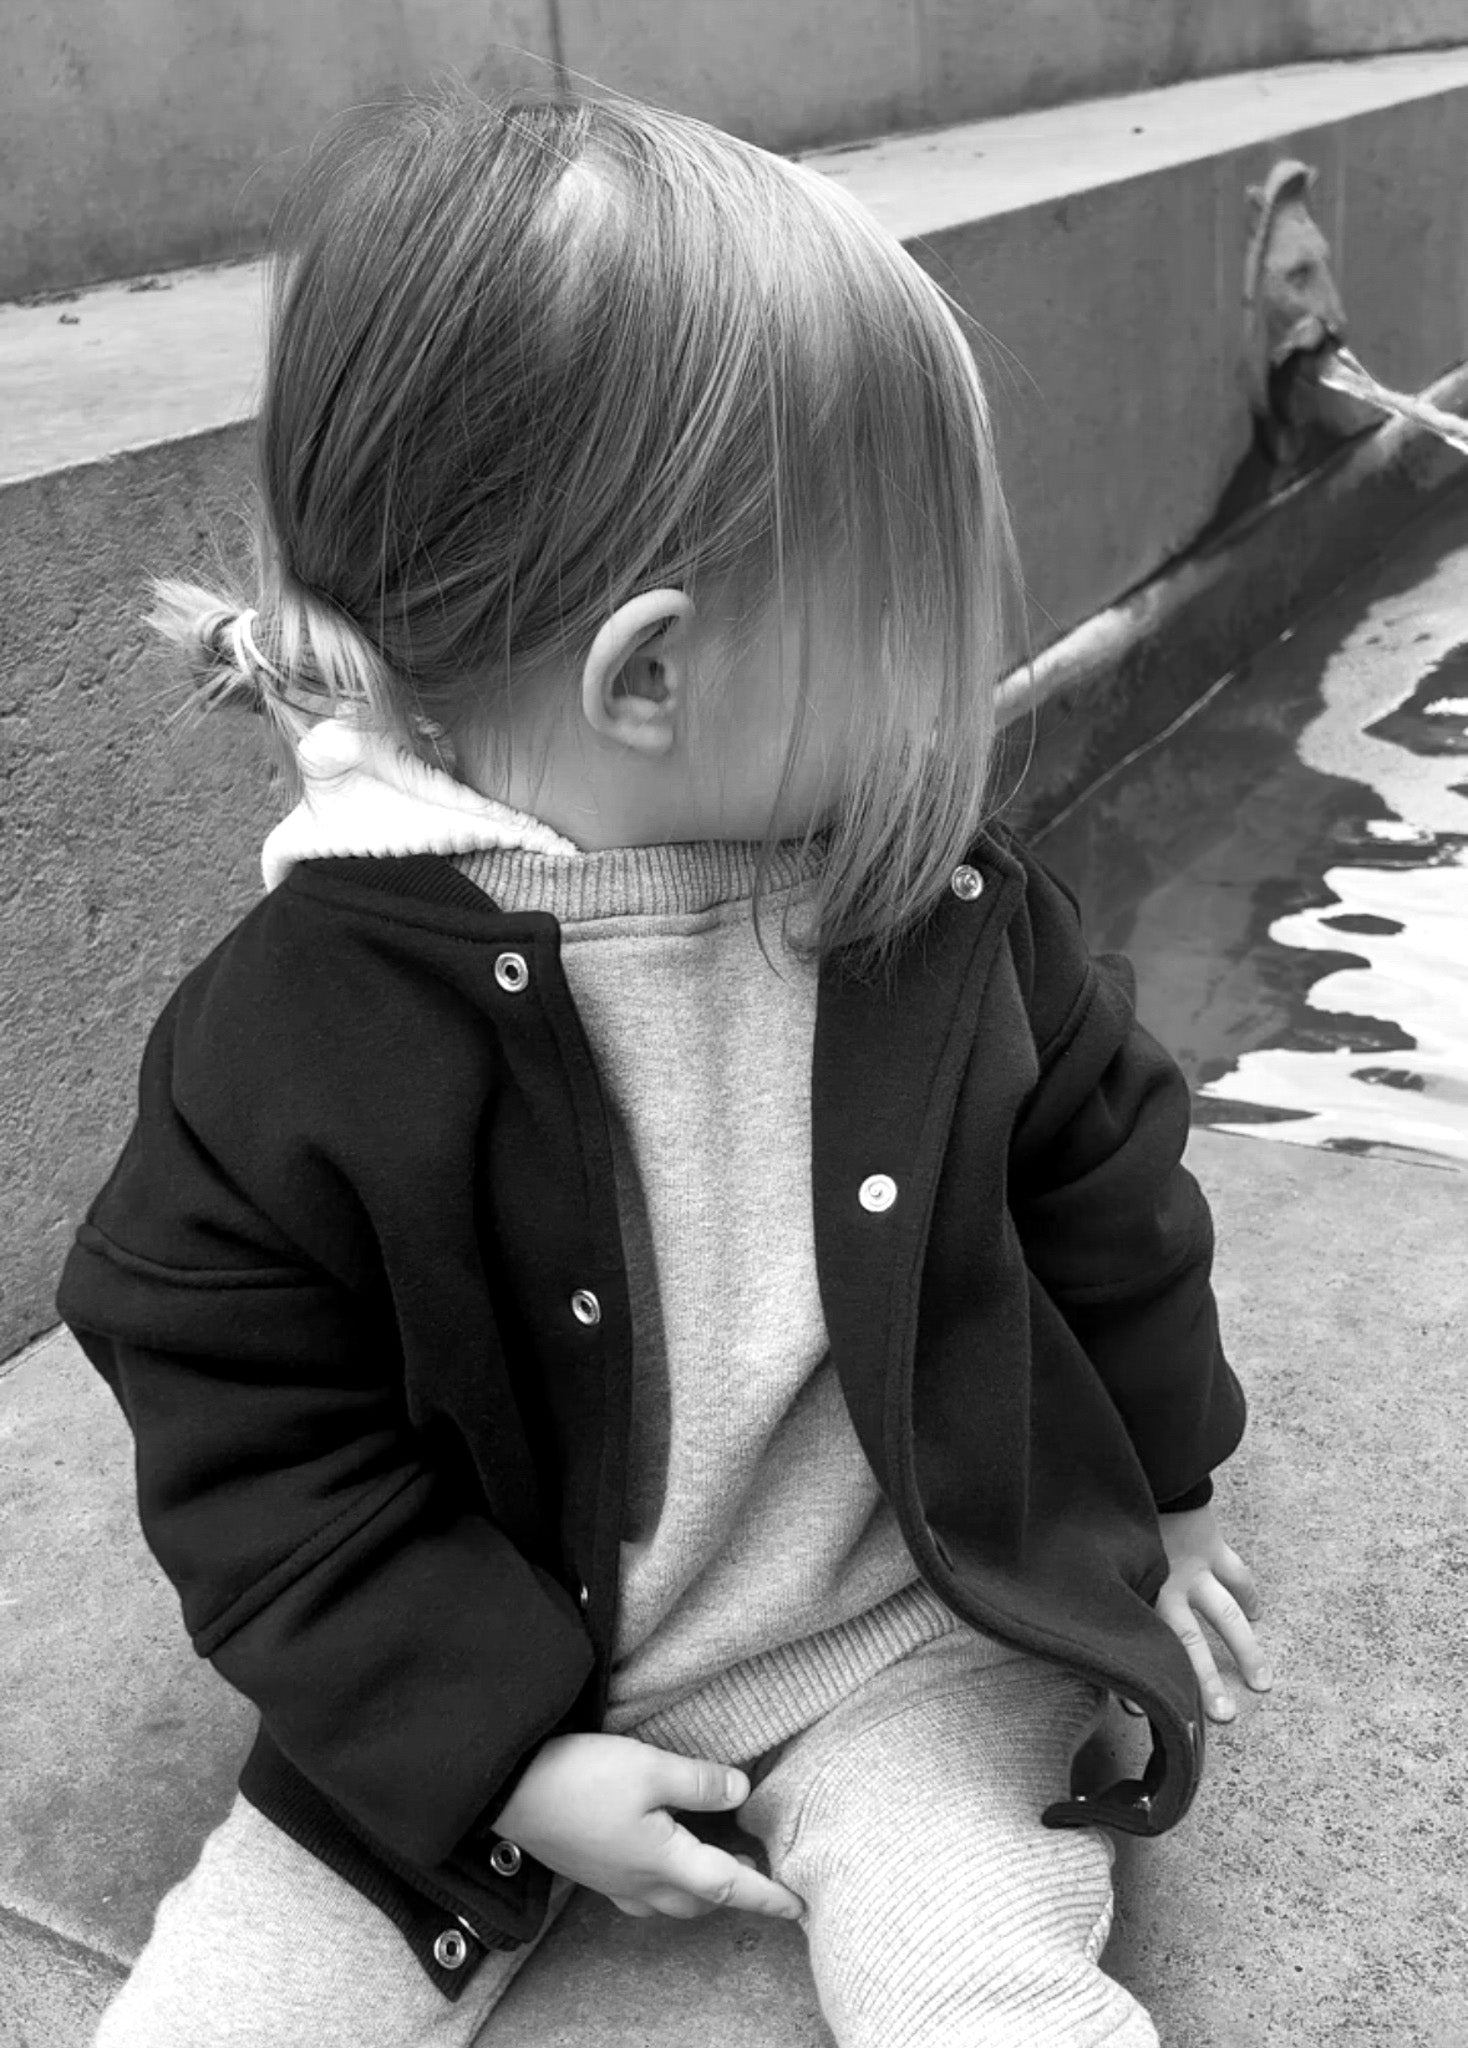 Editorial image of child with jacket on